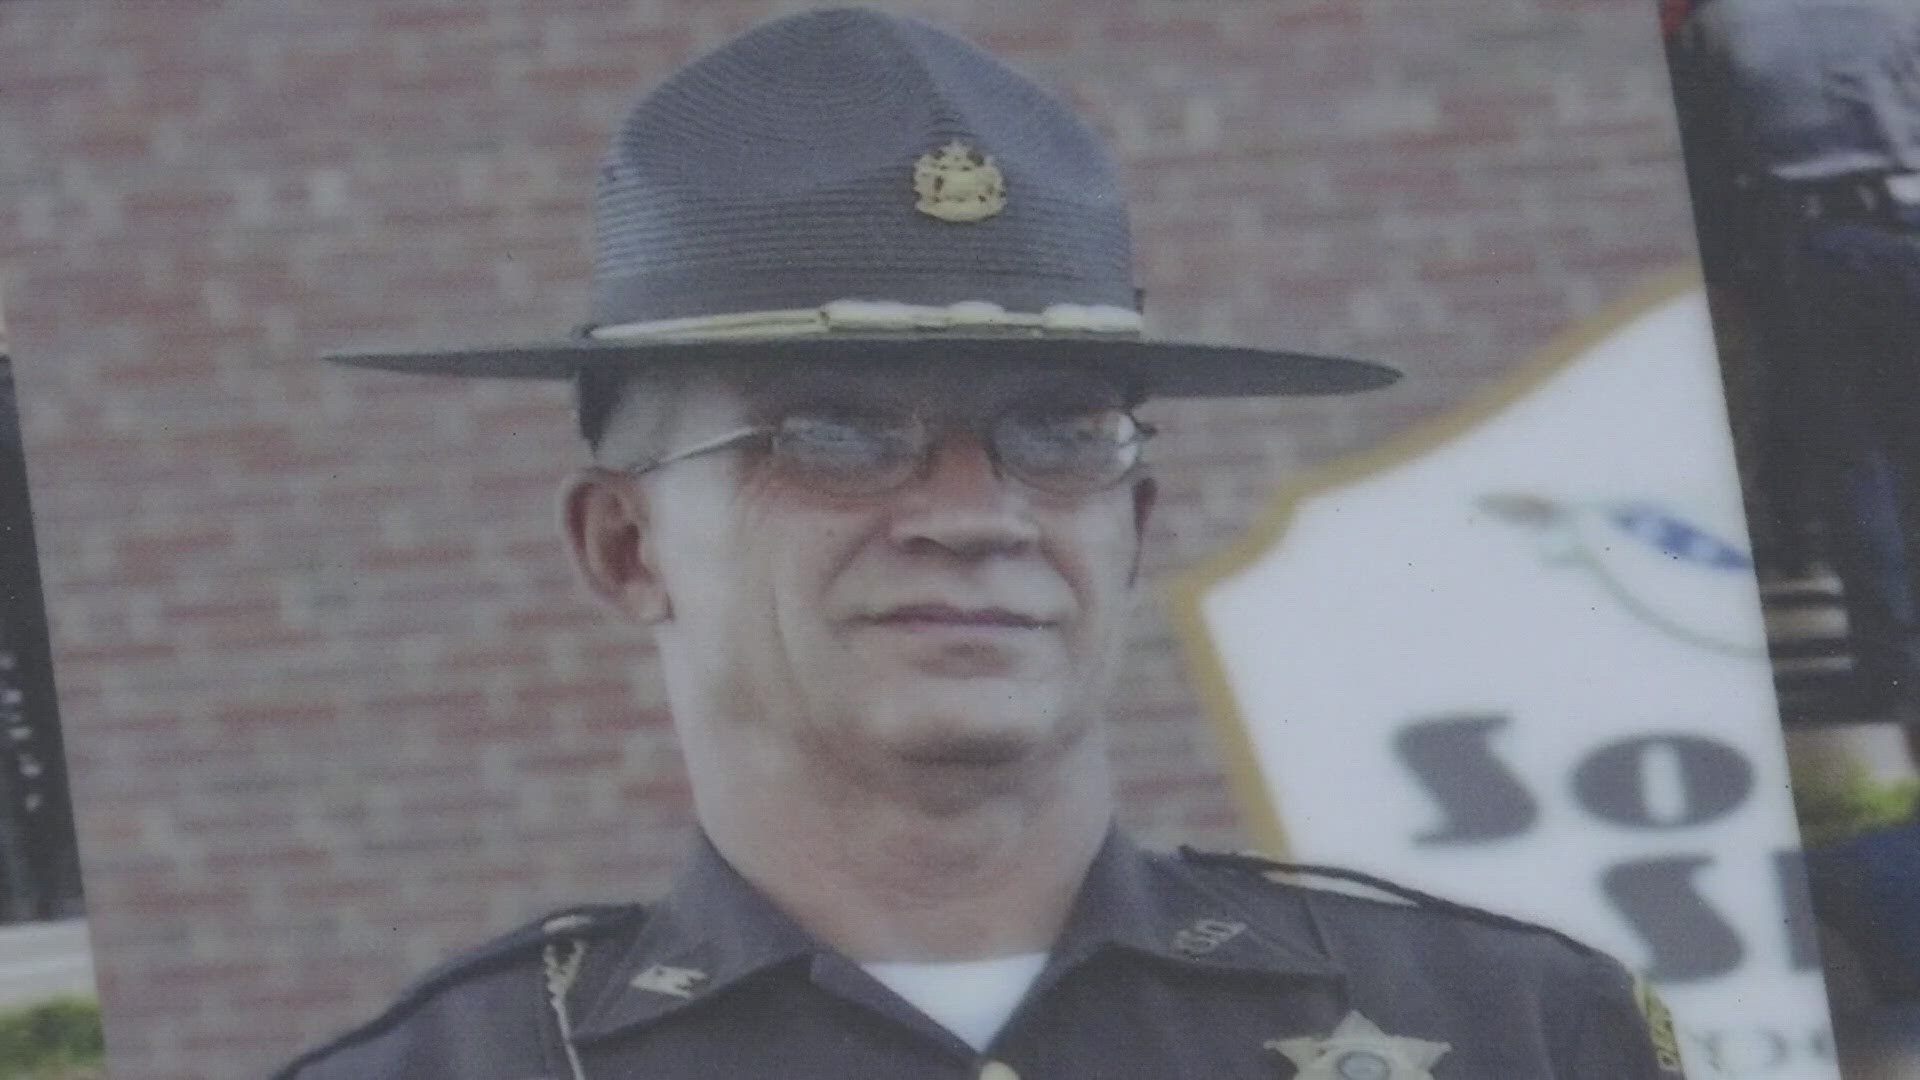 The Somerset County sheriff's deputy was shot and killed on April 25, 2018. The search for the suspect, now serving a life sentence, lasted several days.